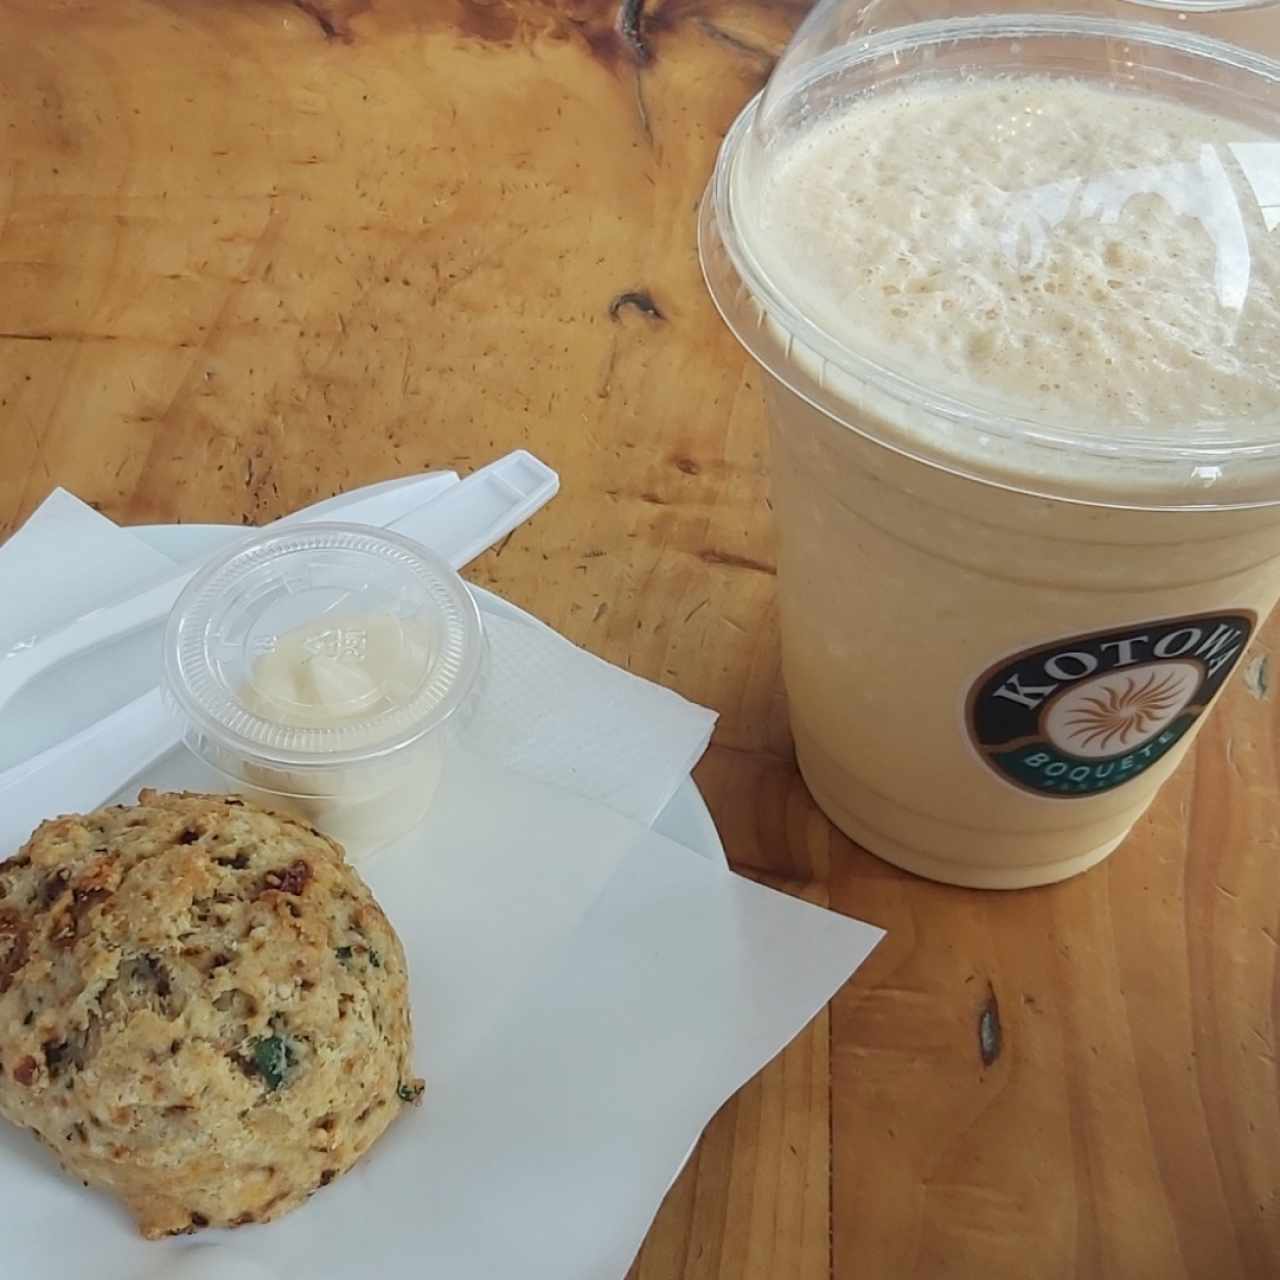 Pumpkin spice frappe y biscuit con tomate seco